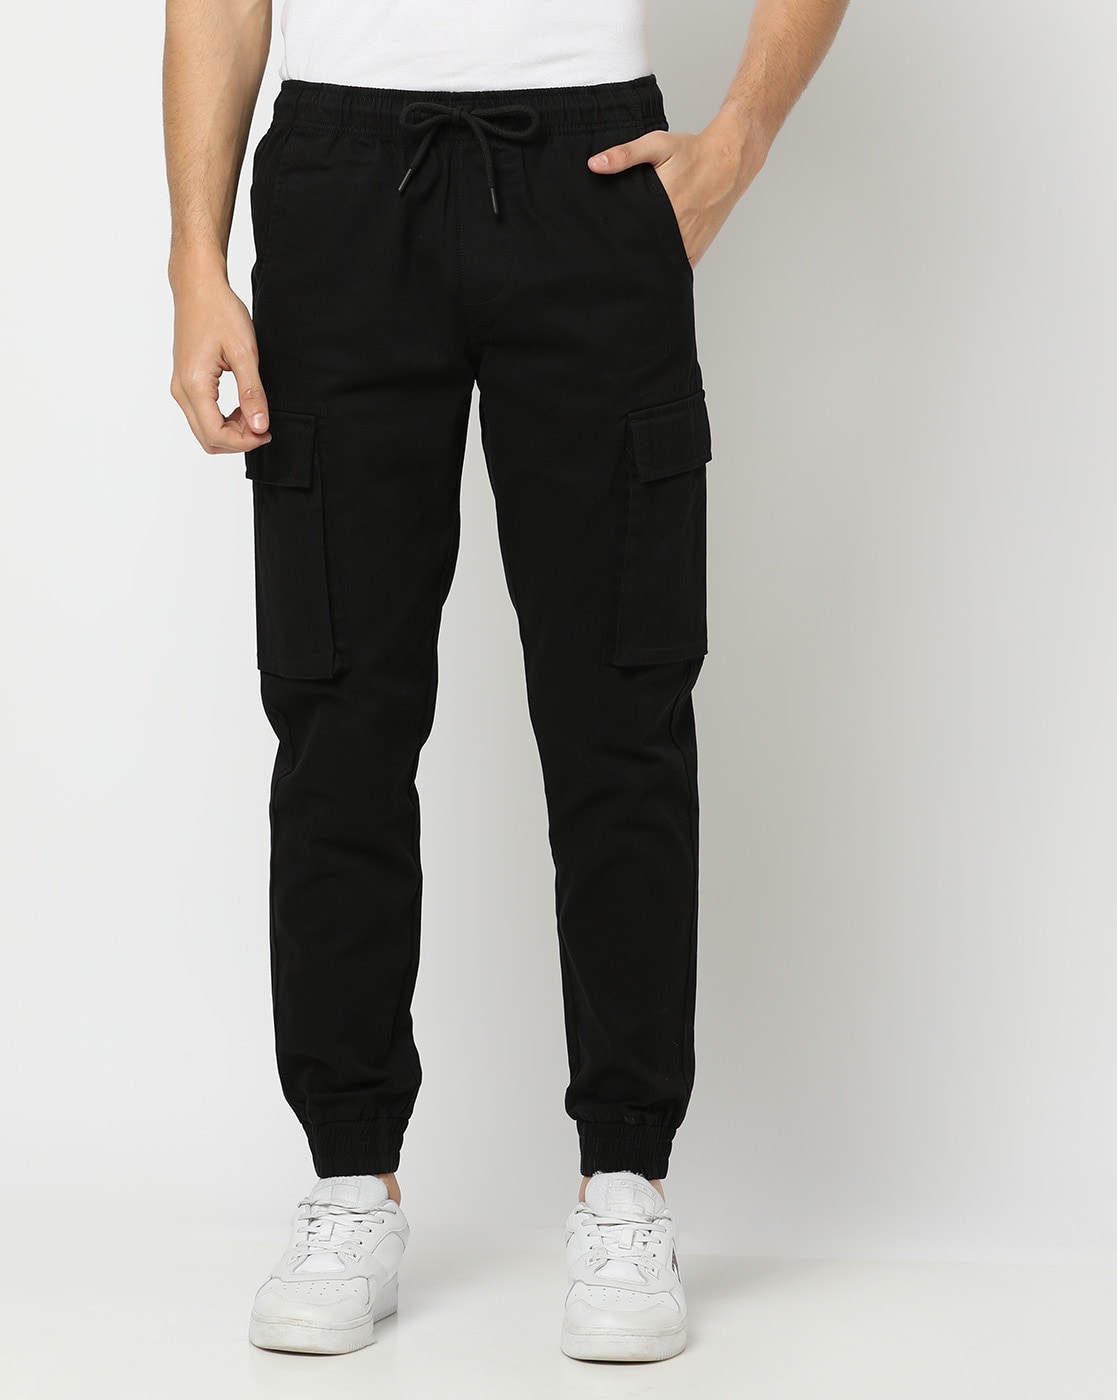 Puntoco Mens Clearance Pants,Men Solid Casual India | Ubuy